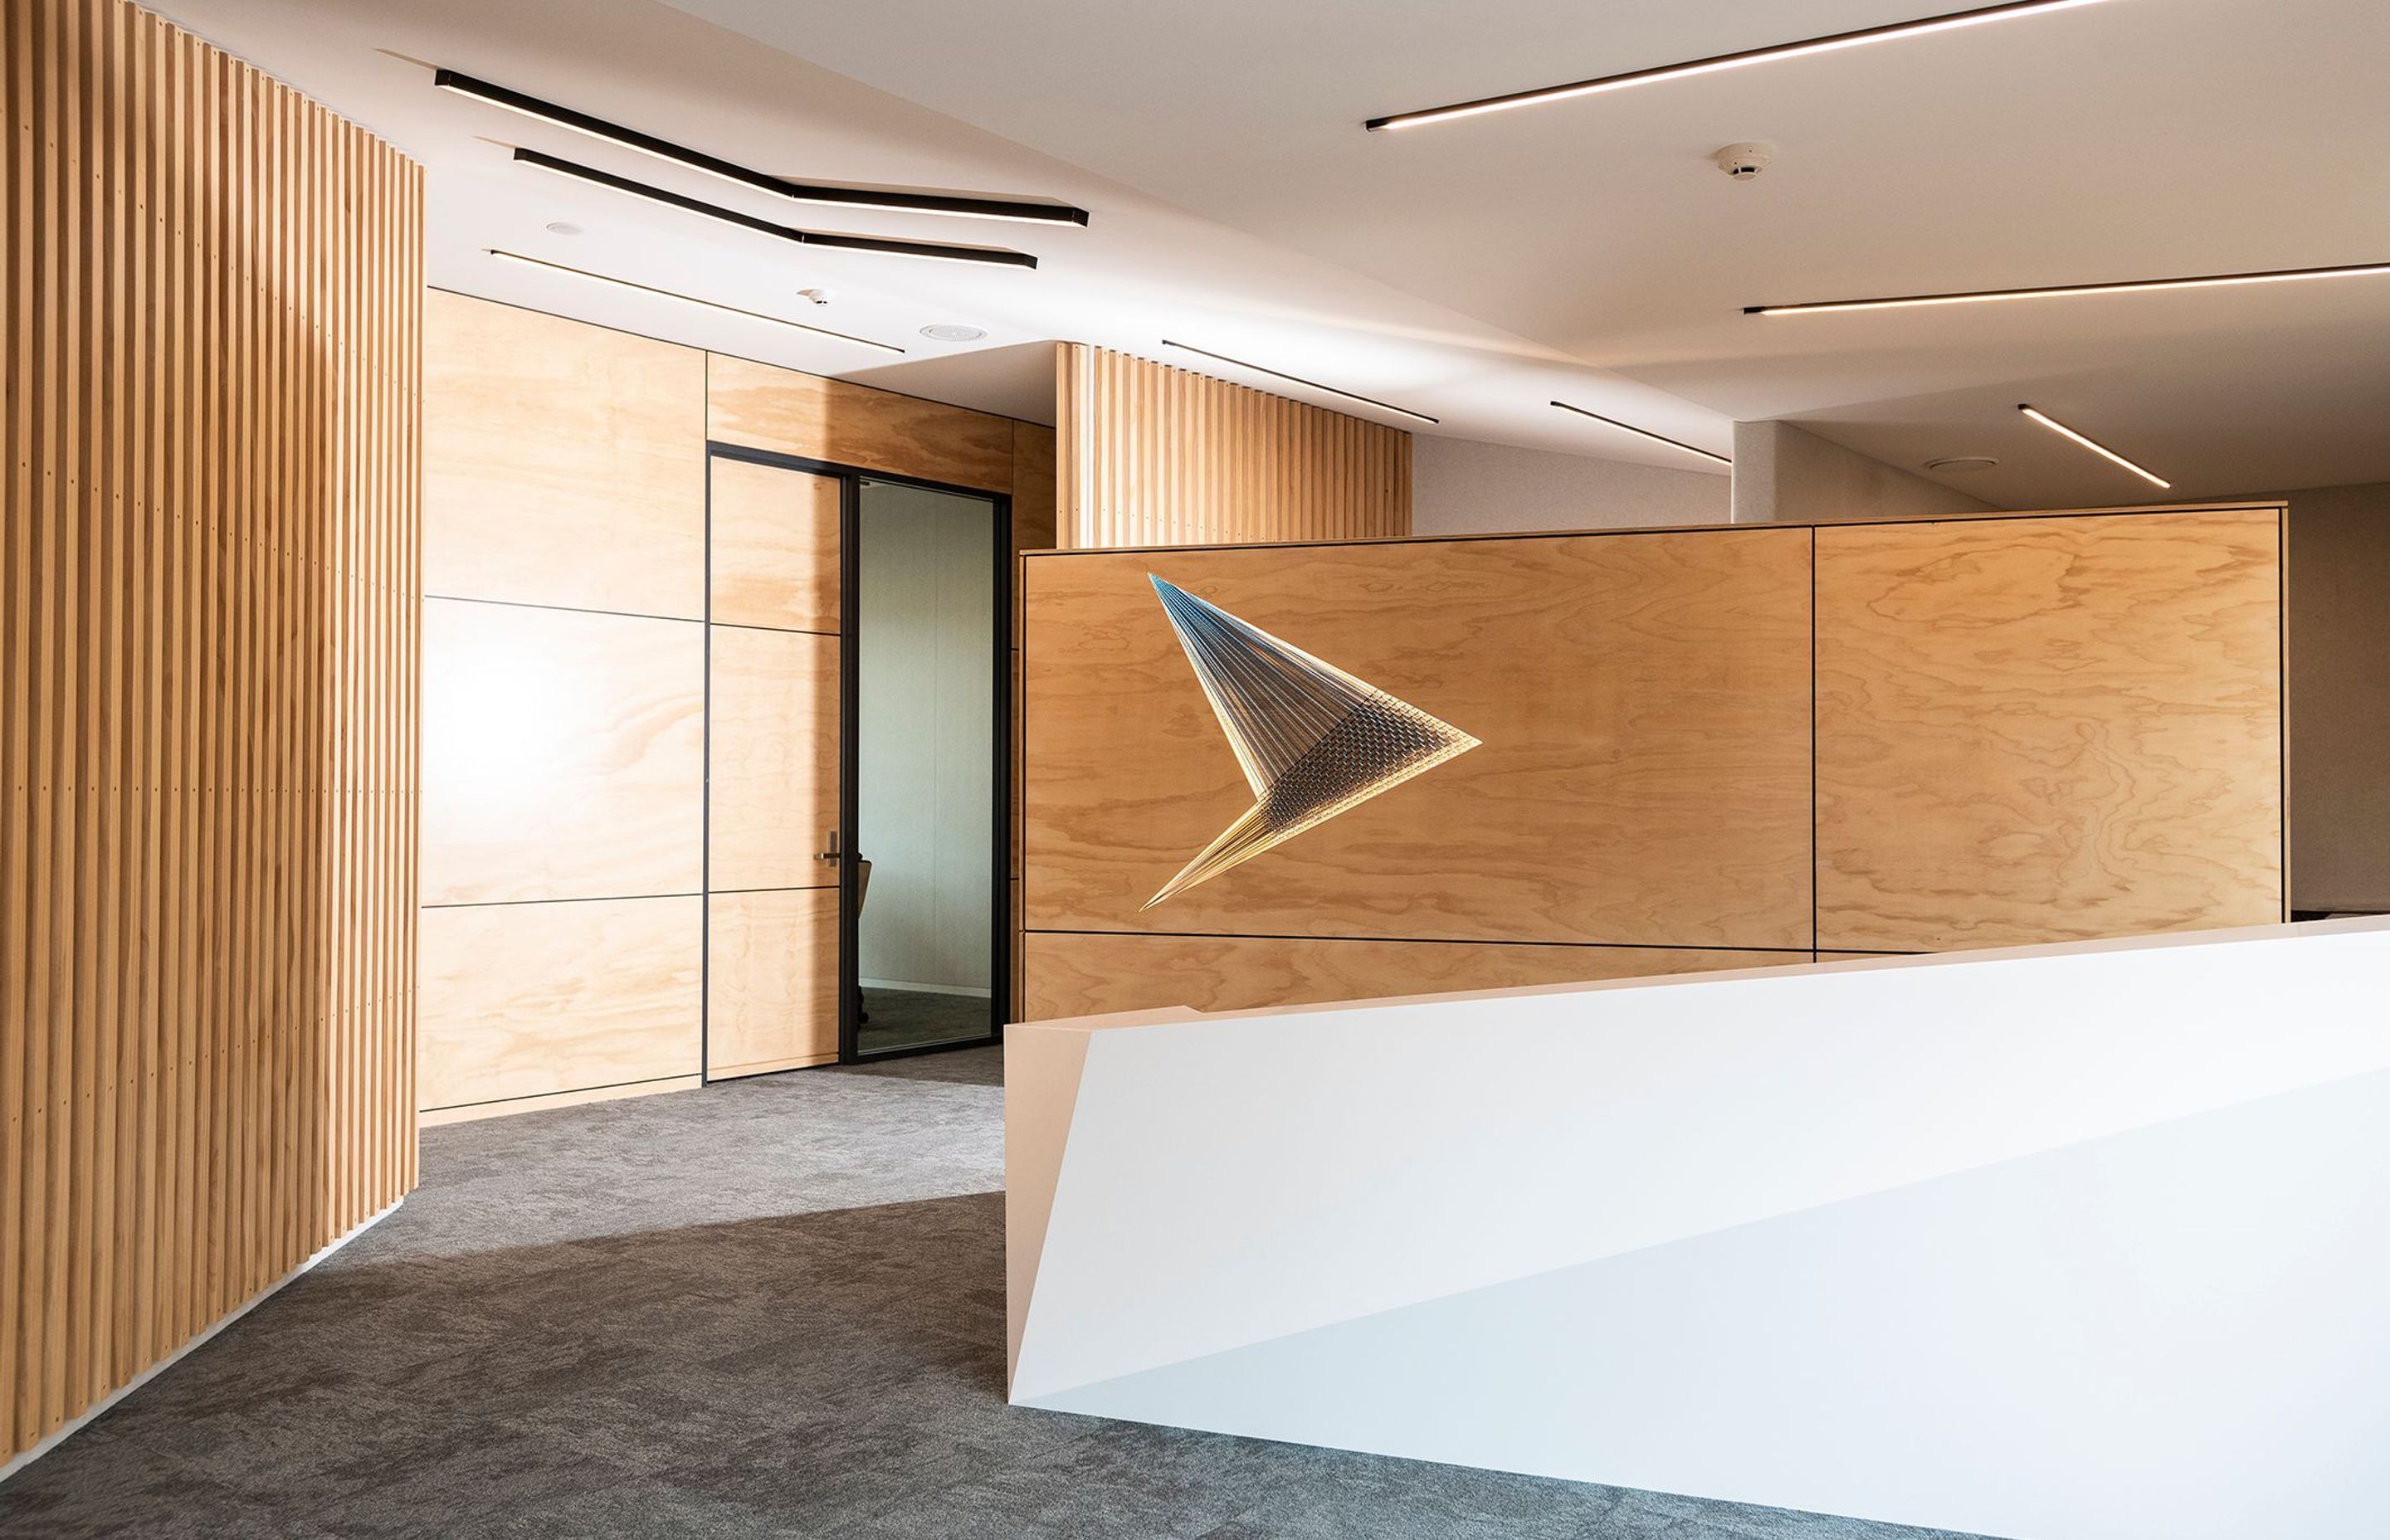 Tavolo Coronet was selected for its elegant and warm white colour profile and the surface left with a matte finish to perfectly complement the timber accents in this newly refurbished office space.